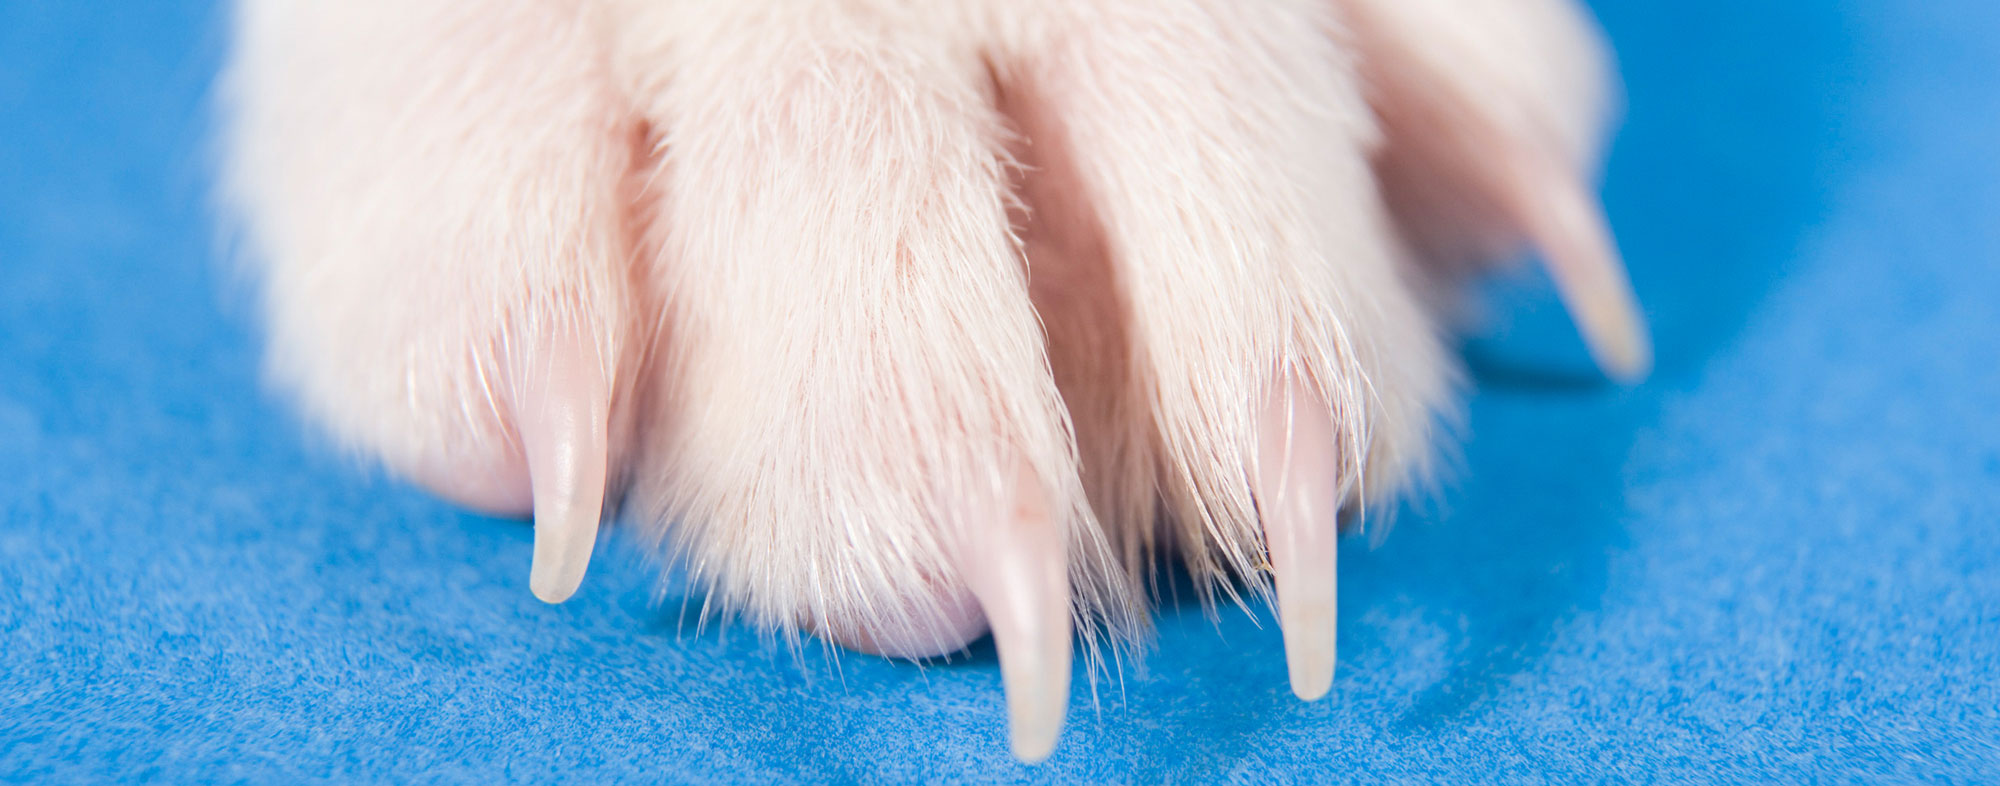 How to Find the Quick When Trimming Black or White Dog Nails - toe beans